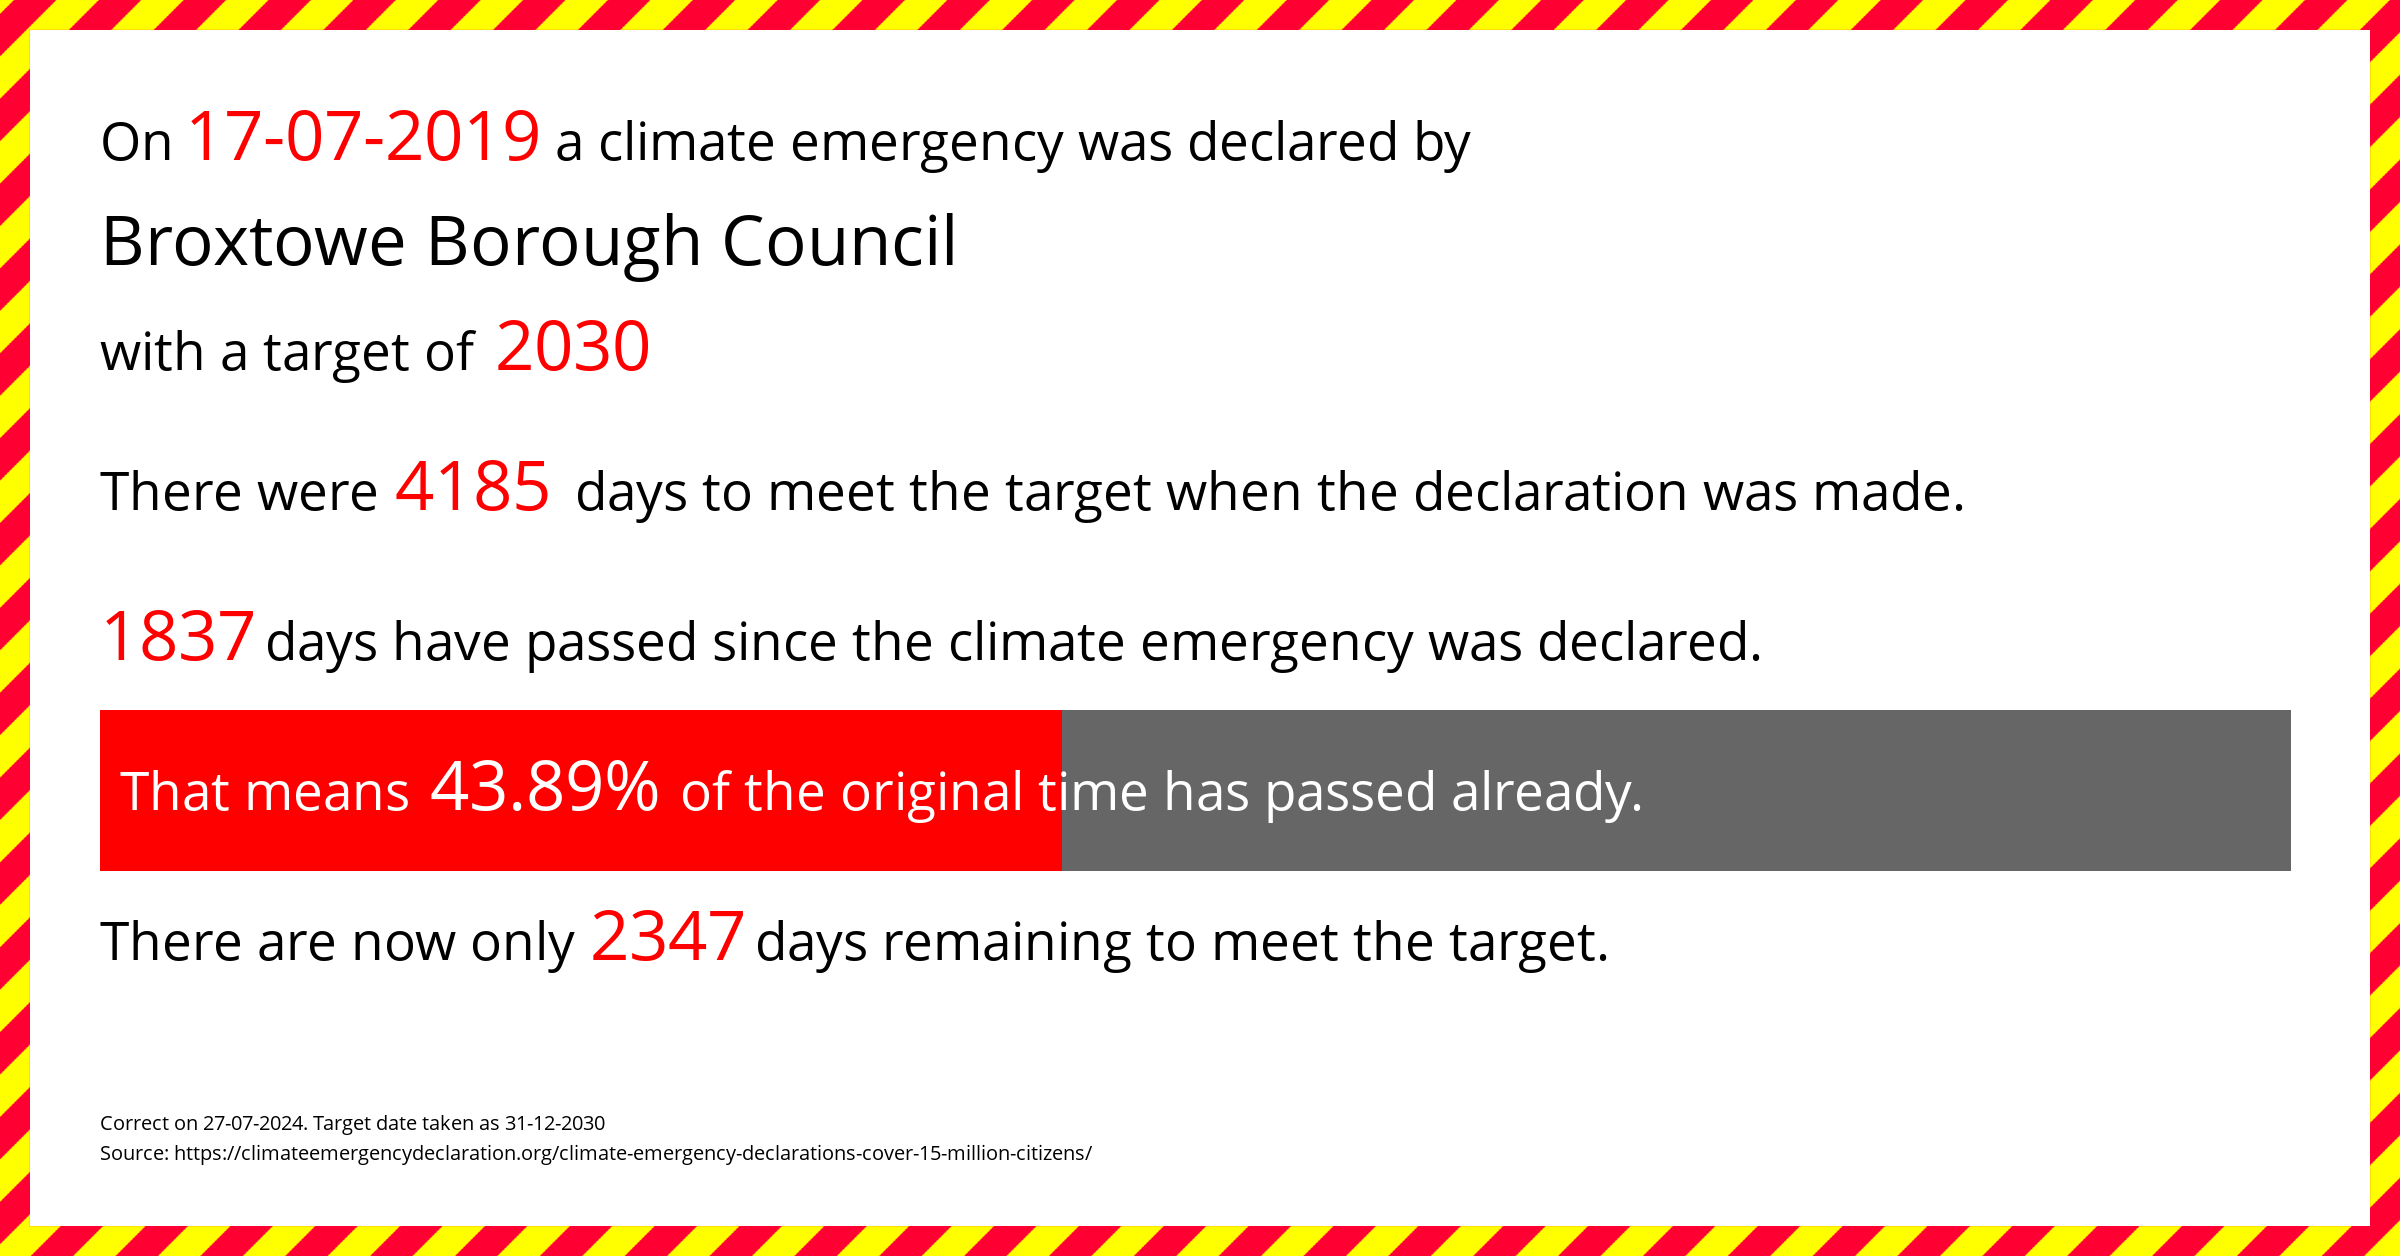 Broxtowe Borough Council declared a Climate emergency on Wednesday 17th July 2019, with a target of 2030.